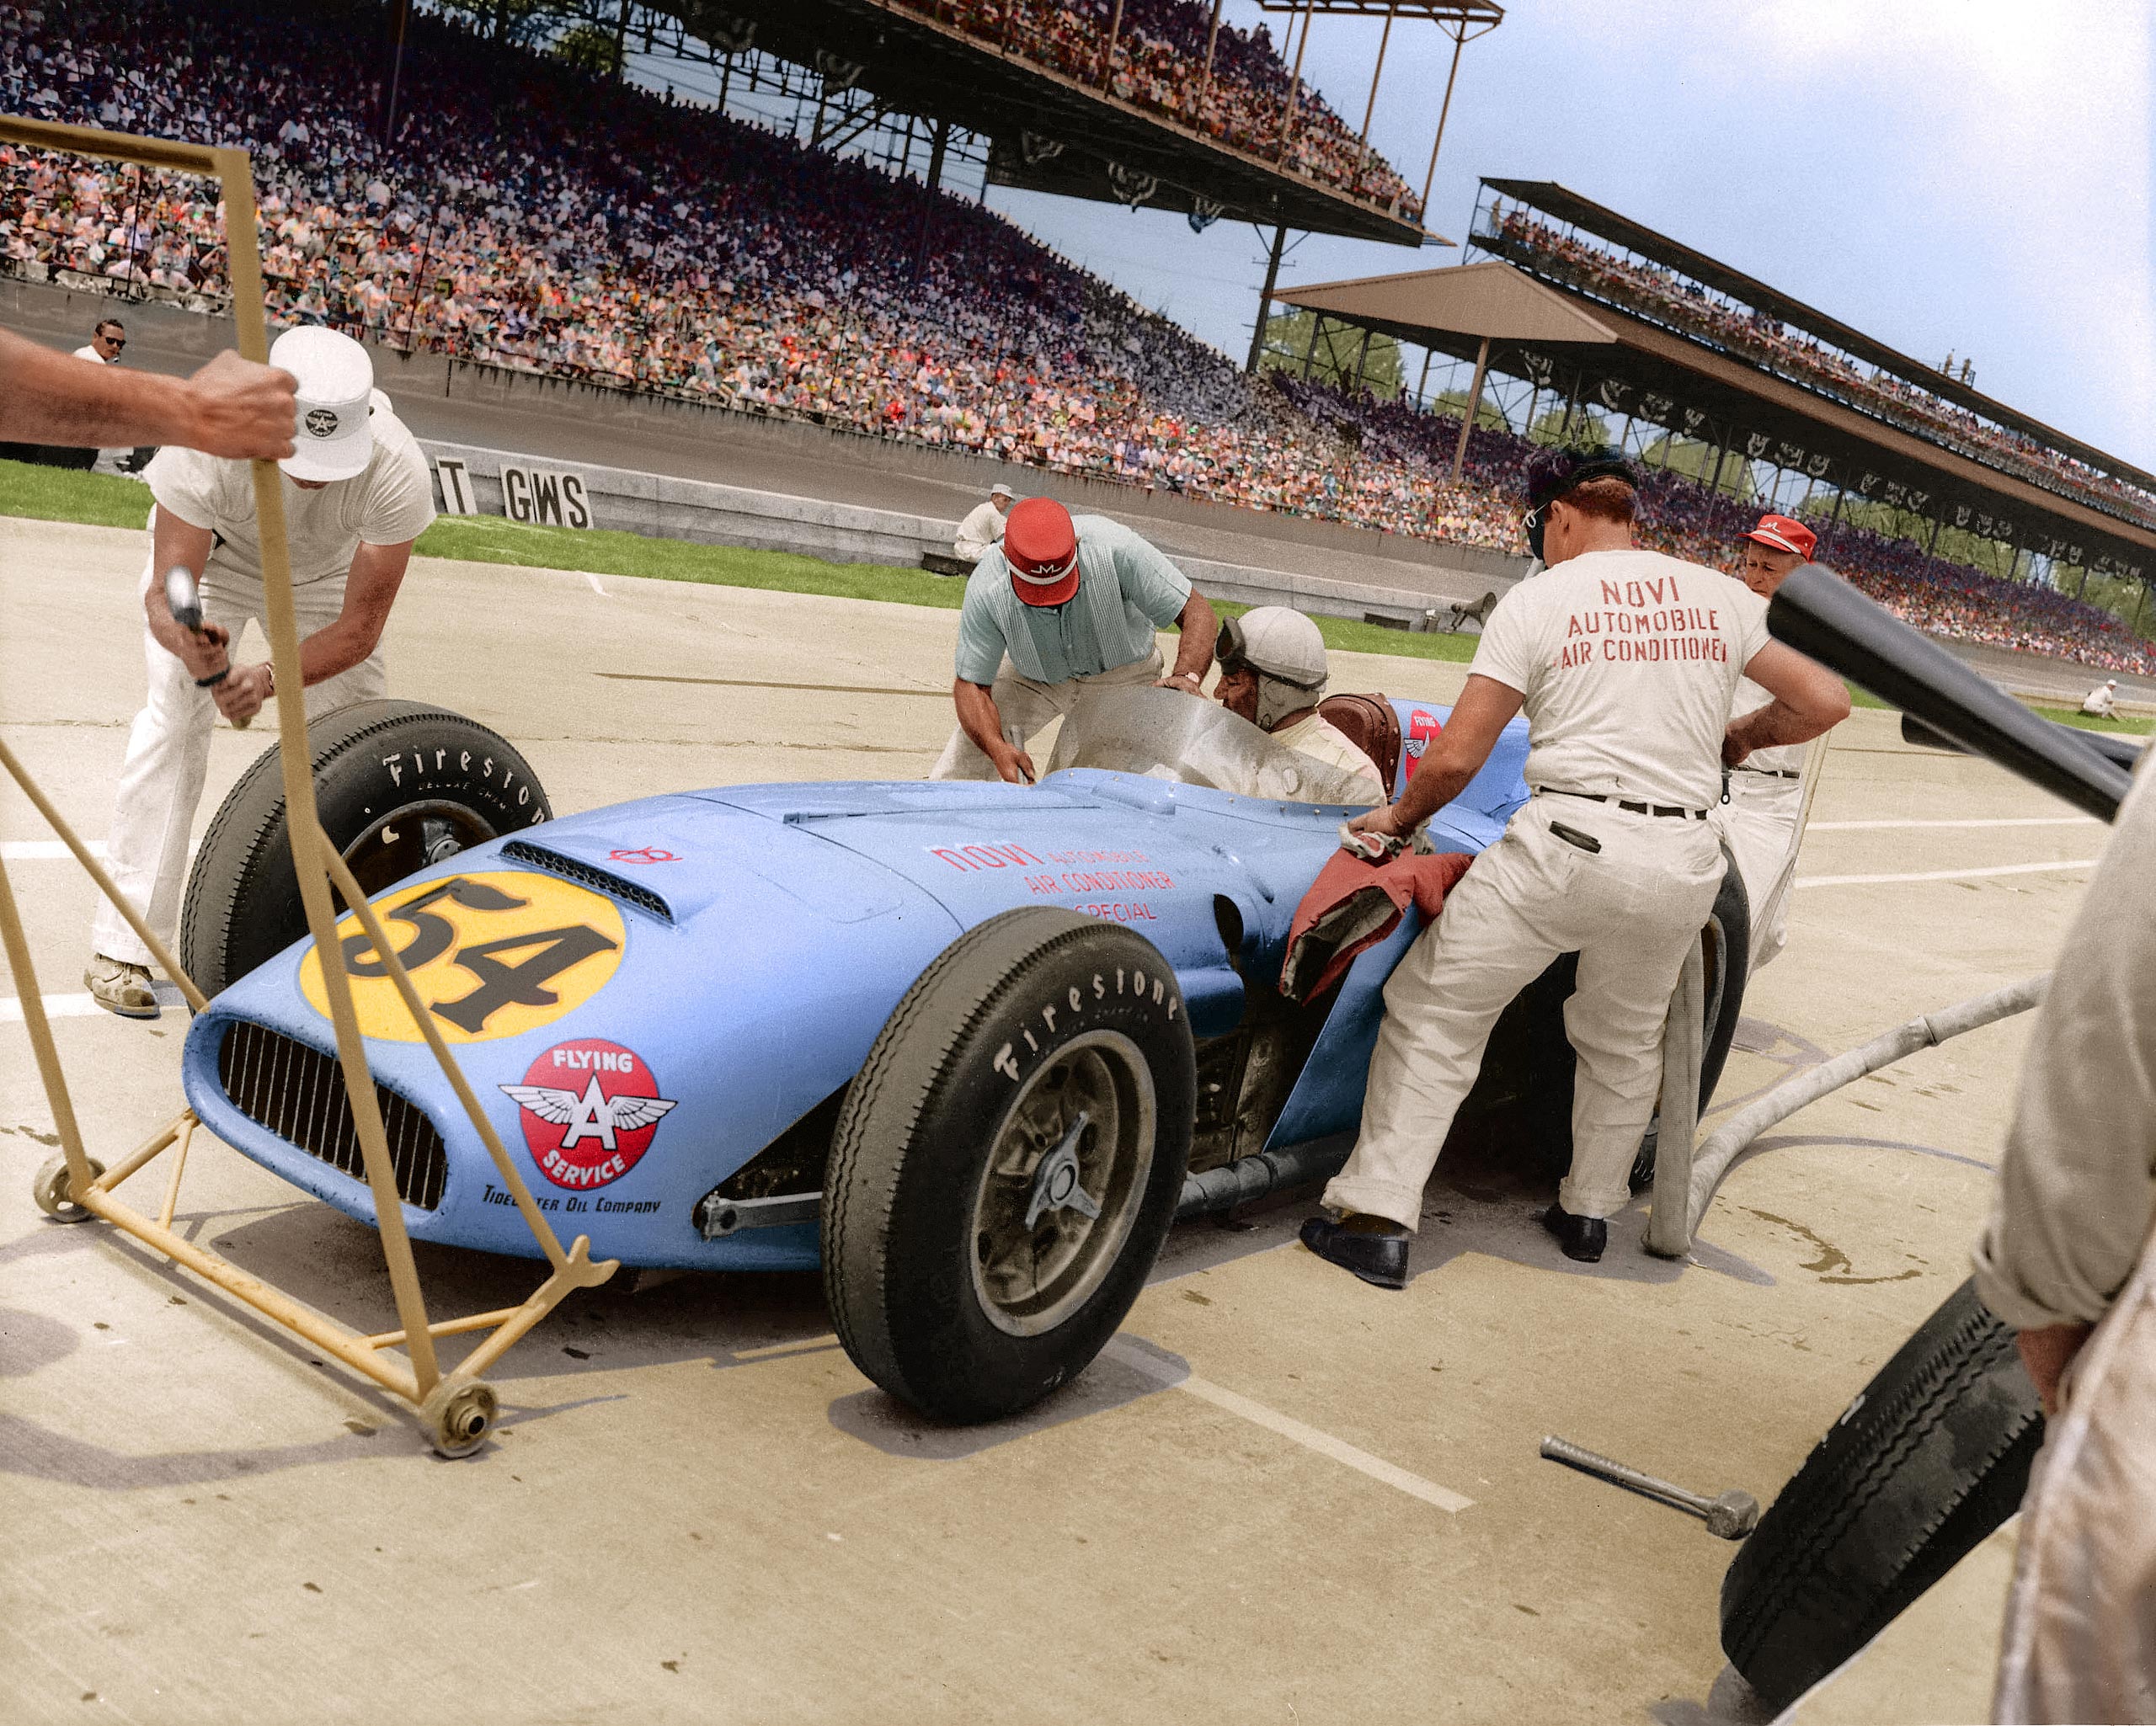 Duke Nalon makes a pit stop during the running of the Indianapolis 500 Indy Car race at Indianapolis Motor Speedway on May 30, 1948. Driving a 1947 Kurtis/Offenhauser owned by Lou Welch, Nalon finished third in the event.